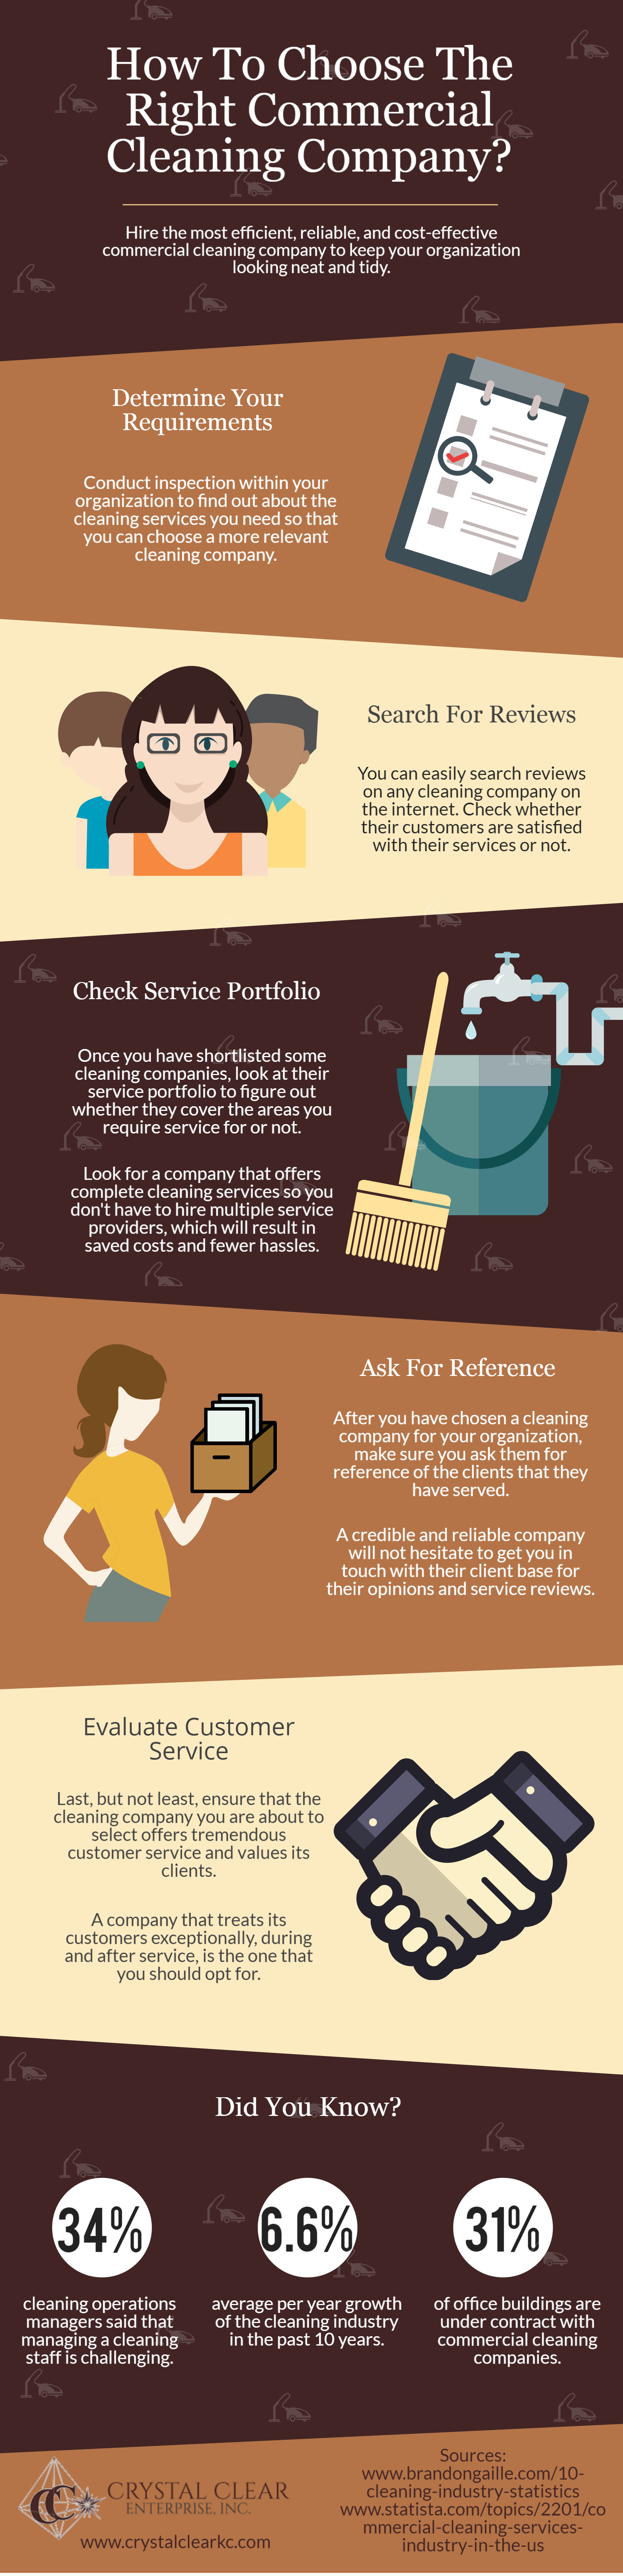 How To Choose Cleaning Comp_Infographic